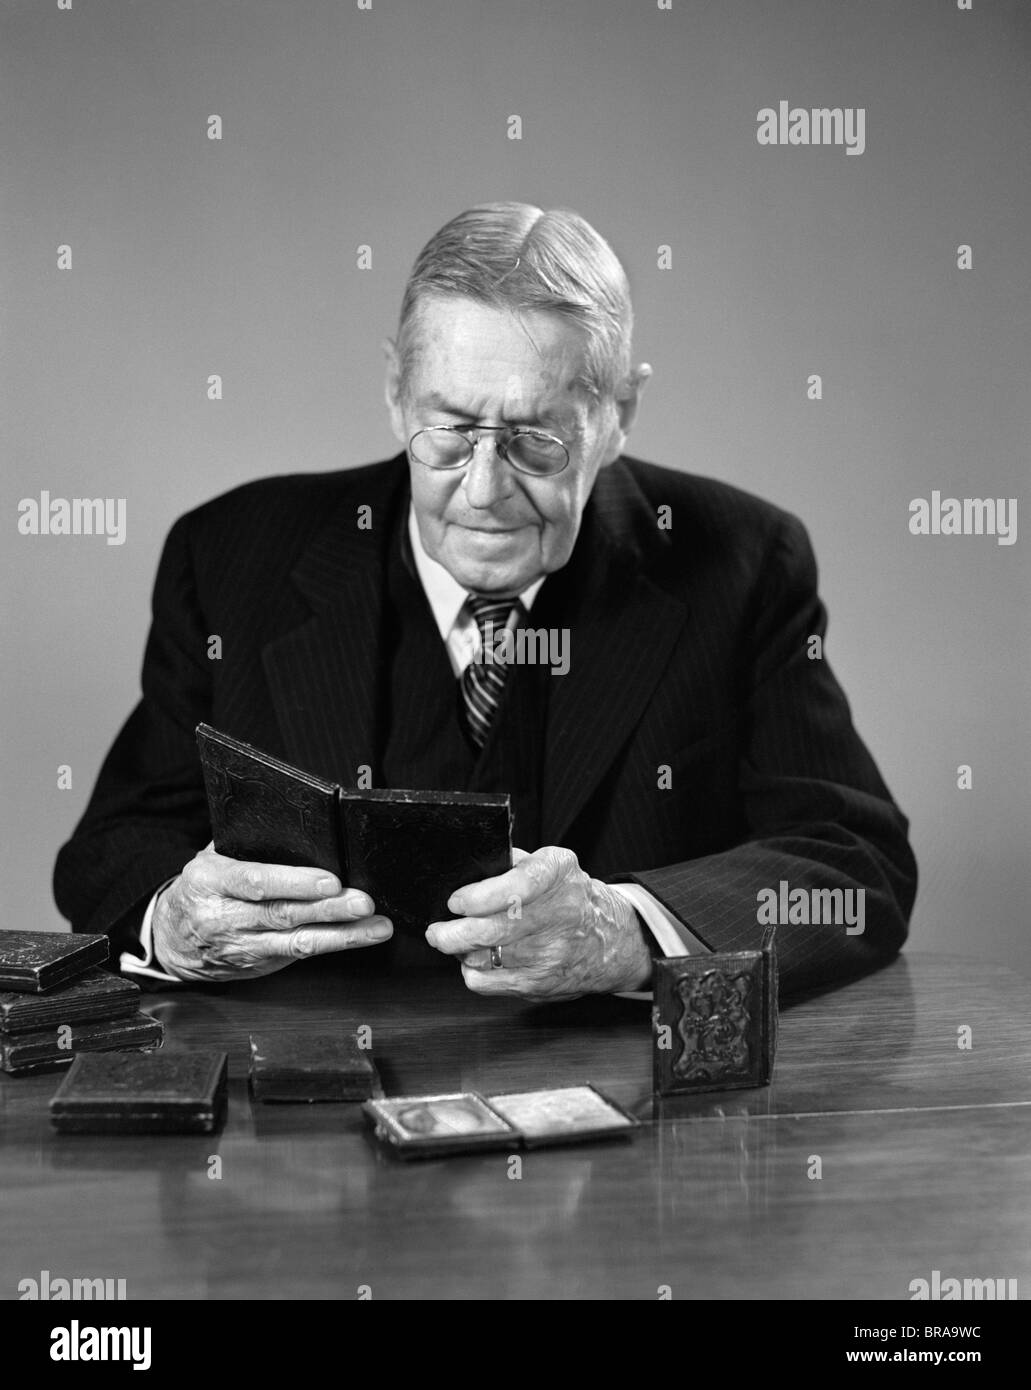 1940s ELDERLY MAN WEARING GLASSES SITTING AT TABLE LOOKING AT DAGUERREOTYPE PHOTOGRAPHS Stock Photo